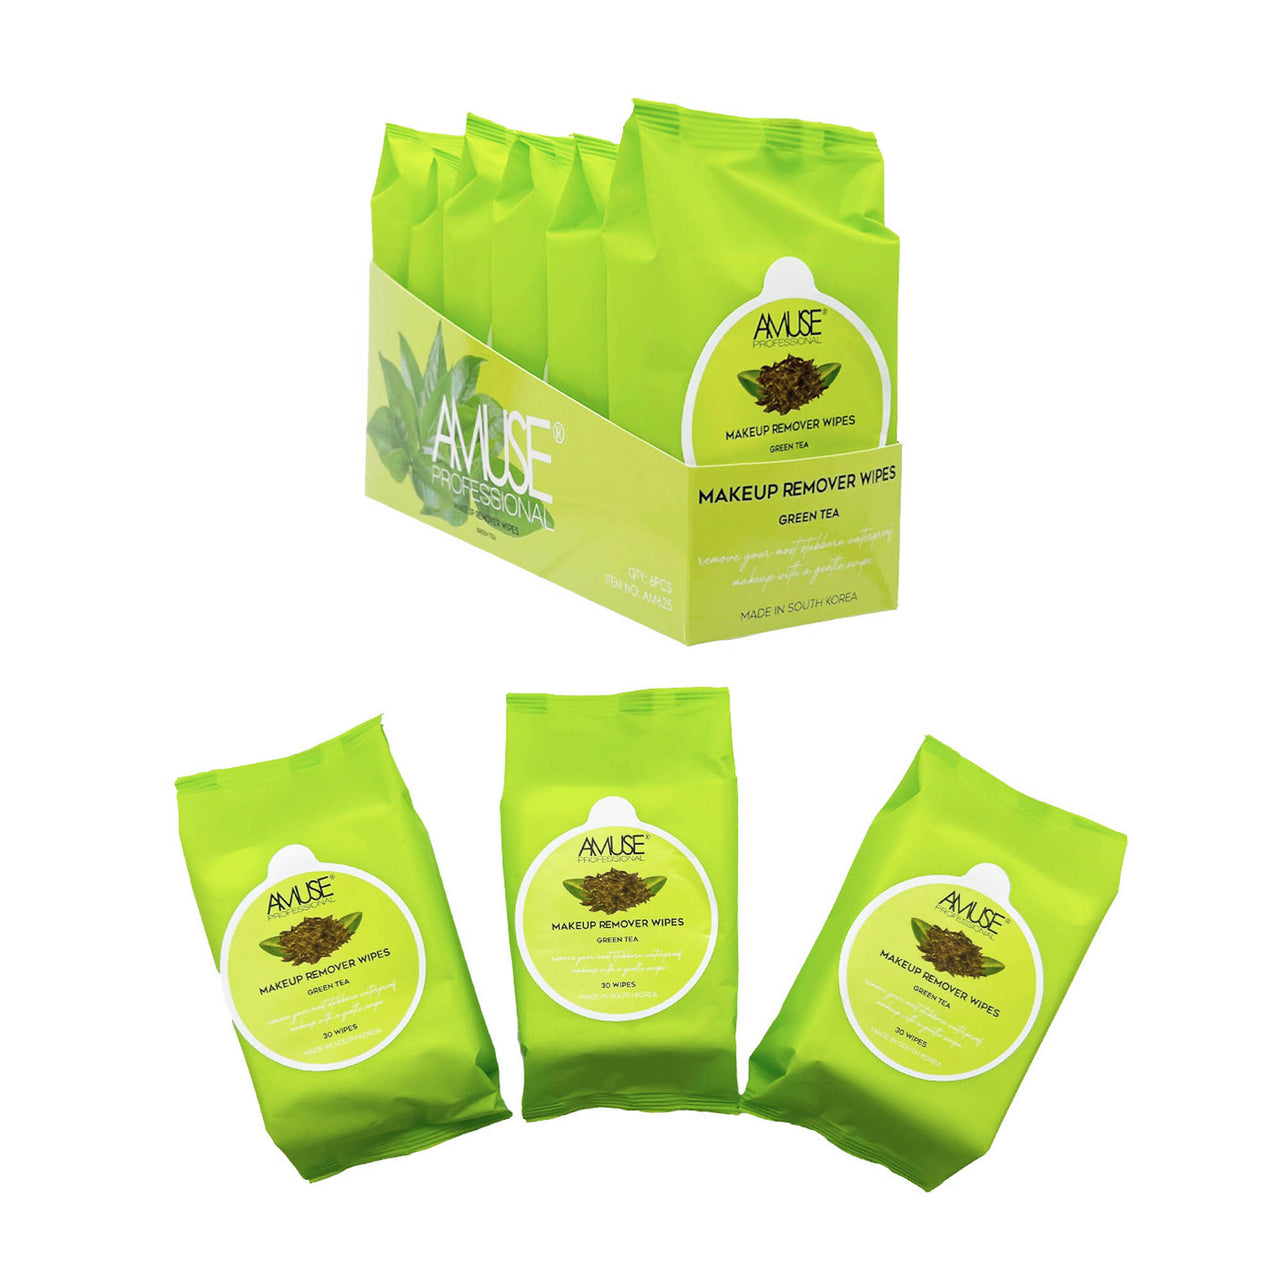 AC-AM625 'Green Tea' Makeup Remover Wipes : 6 PC